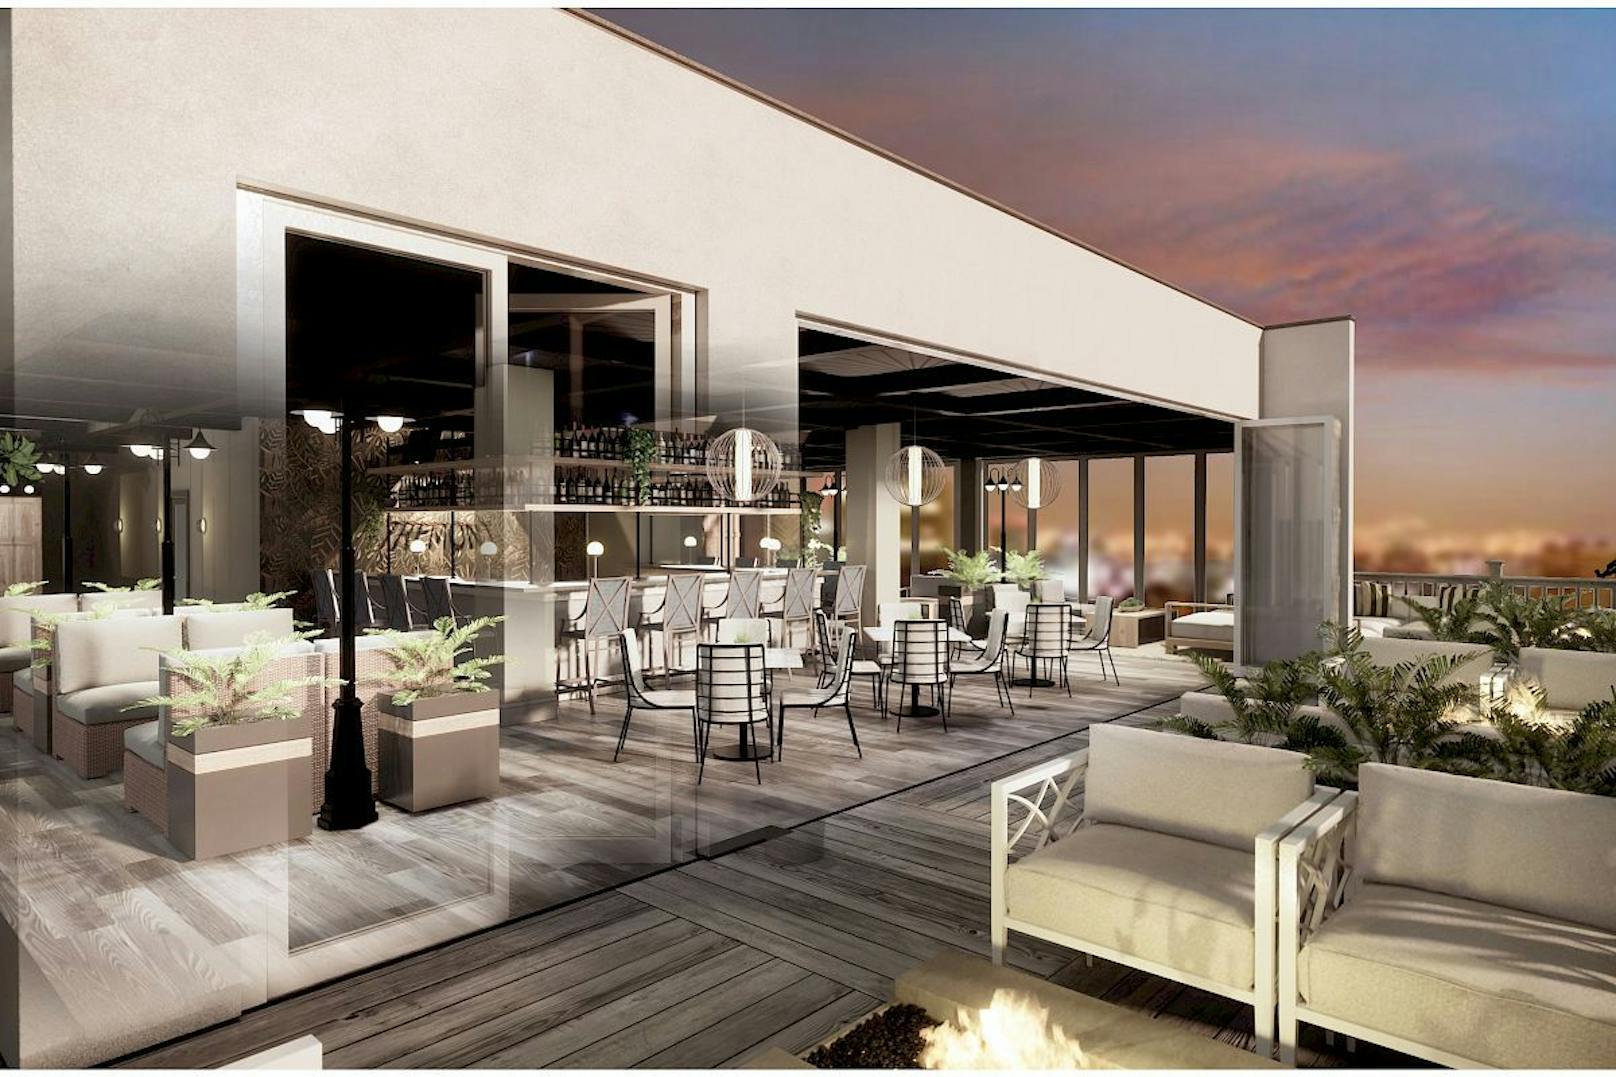 6. The Tremont House Rooftop Bar in Houston (USA)